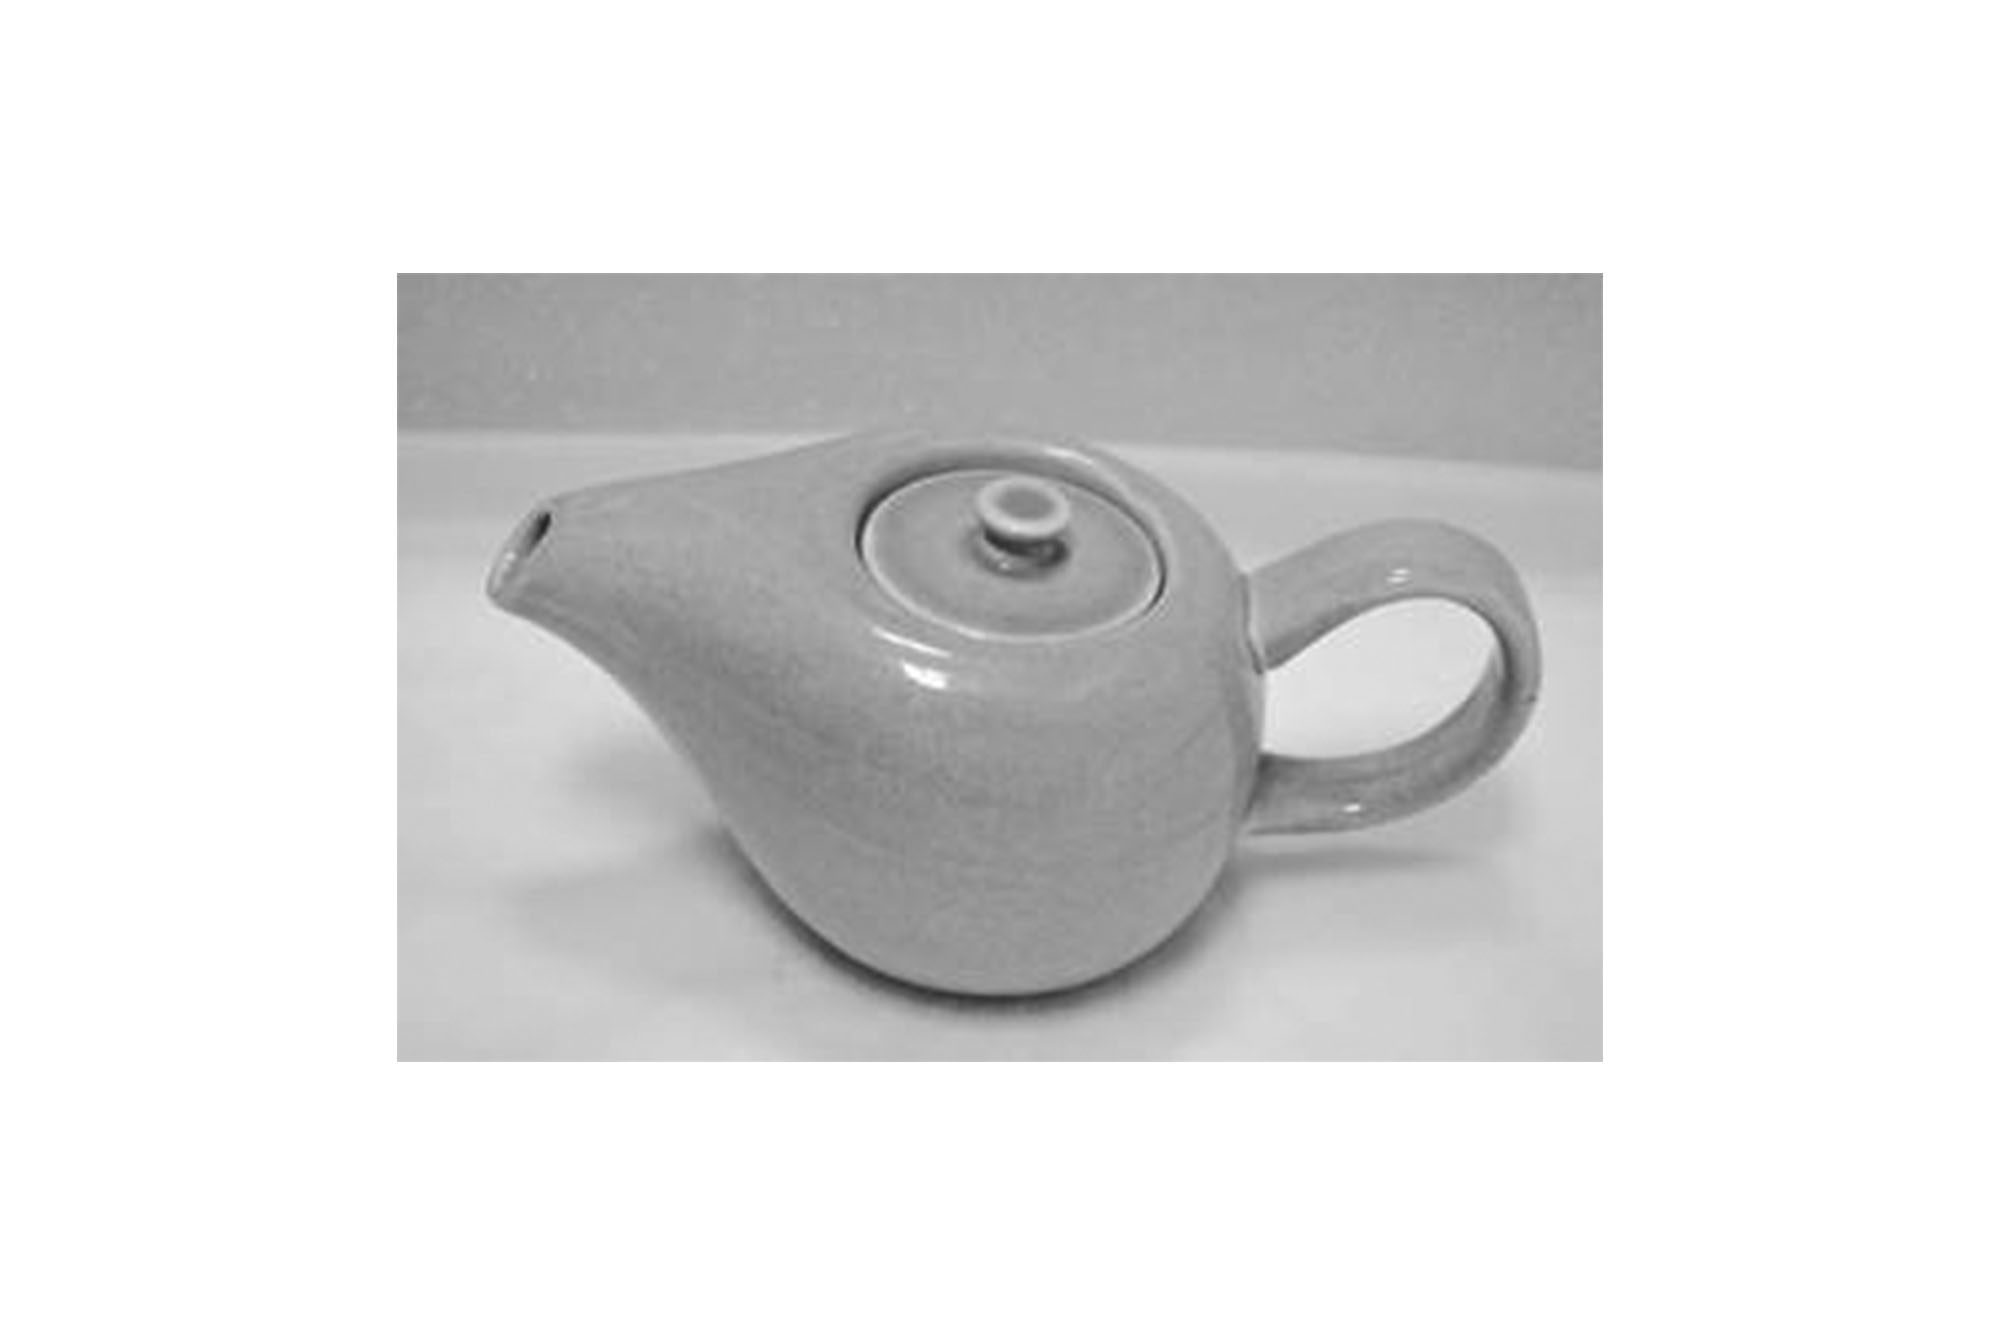 Russel Wright's After Dinner Coffee Pot, a small glazed  pot with a handle and short spout